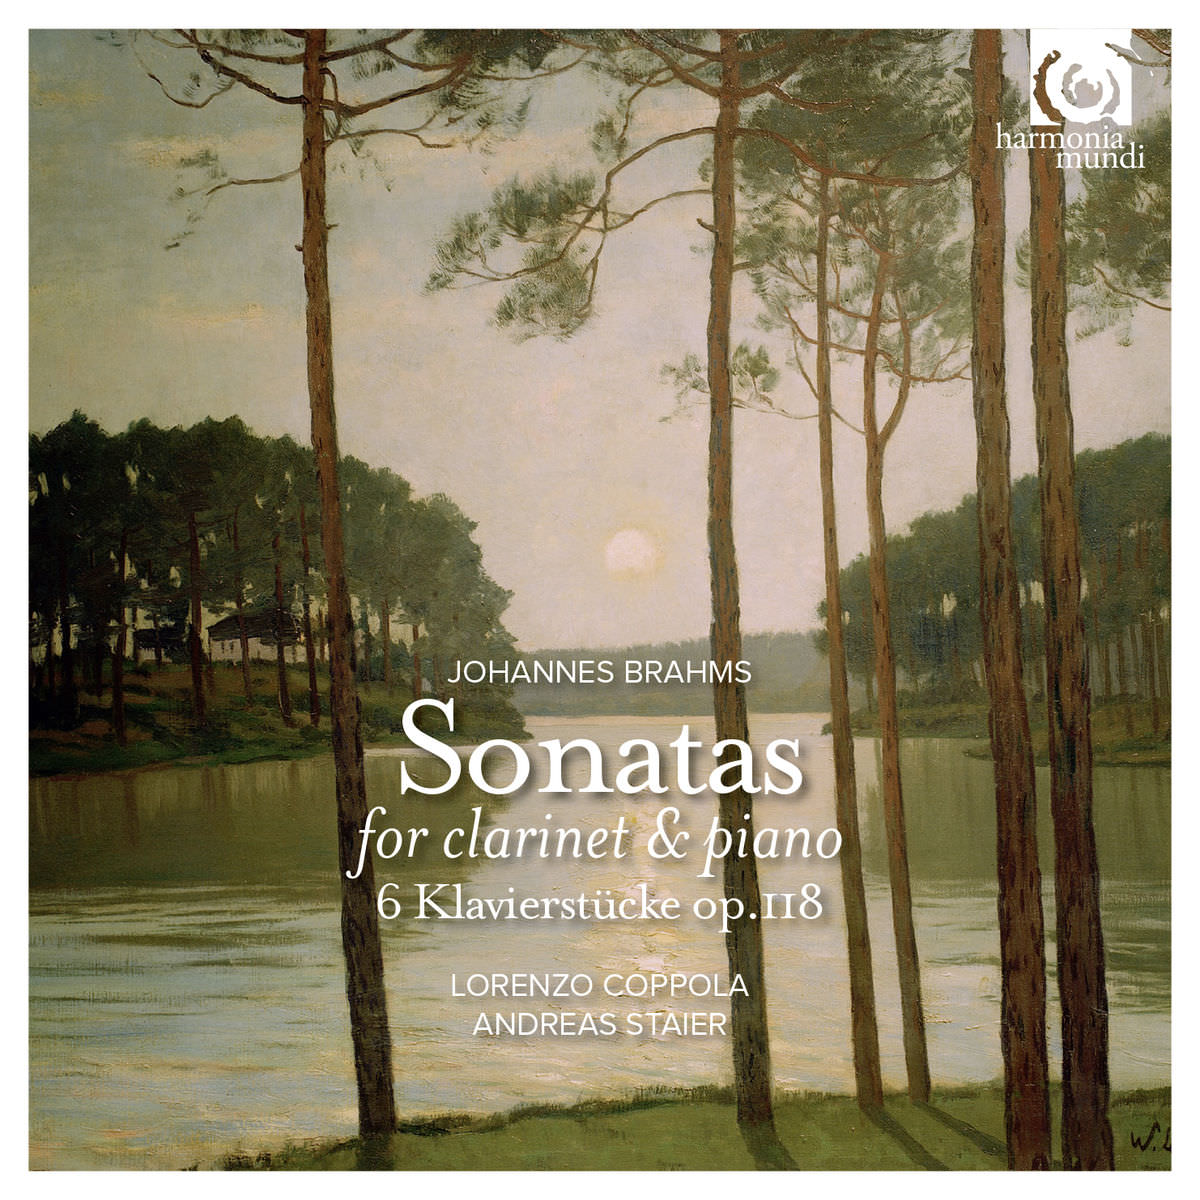 Lorenzo Coppola & Andreas Staier - Brahms: Sonatas for Clarinet and Piano, Op. 120 (2015) [FLAC 24bit/96kHz]